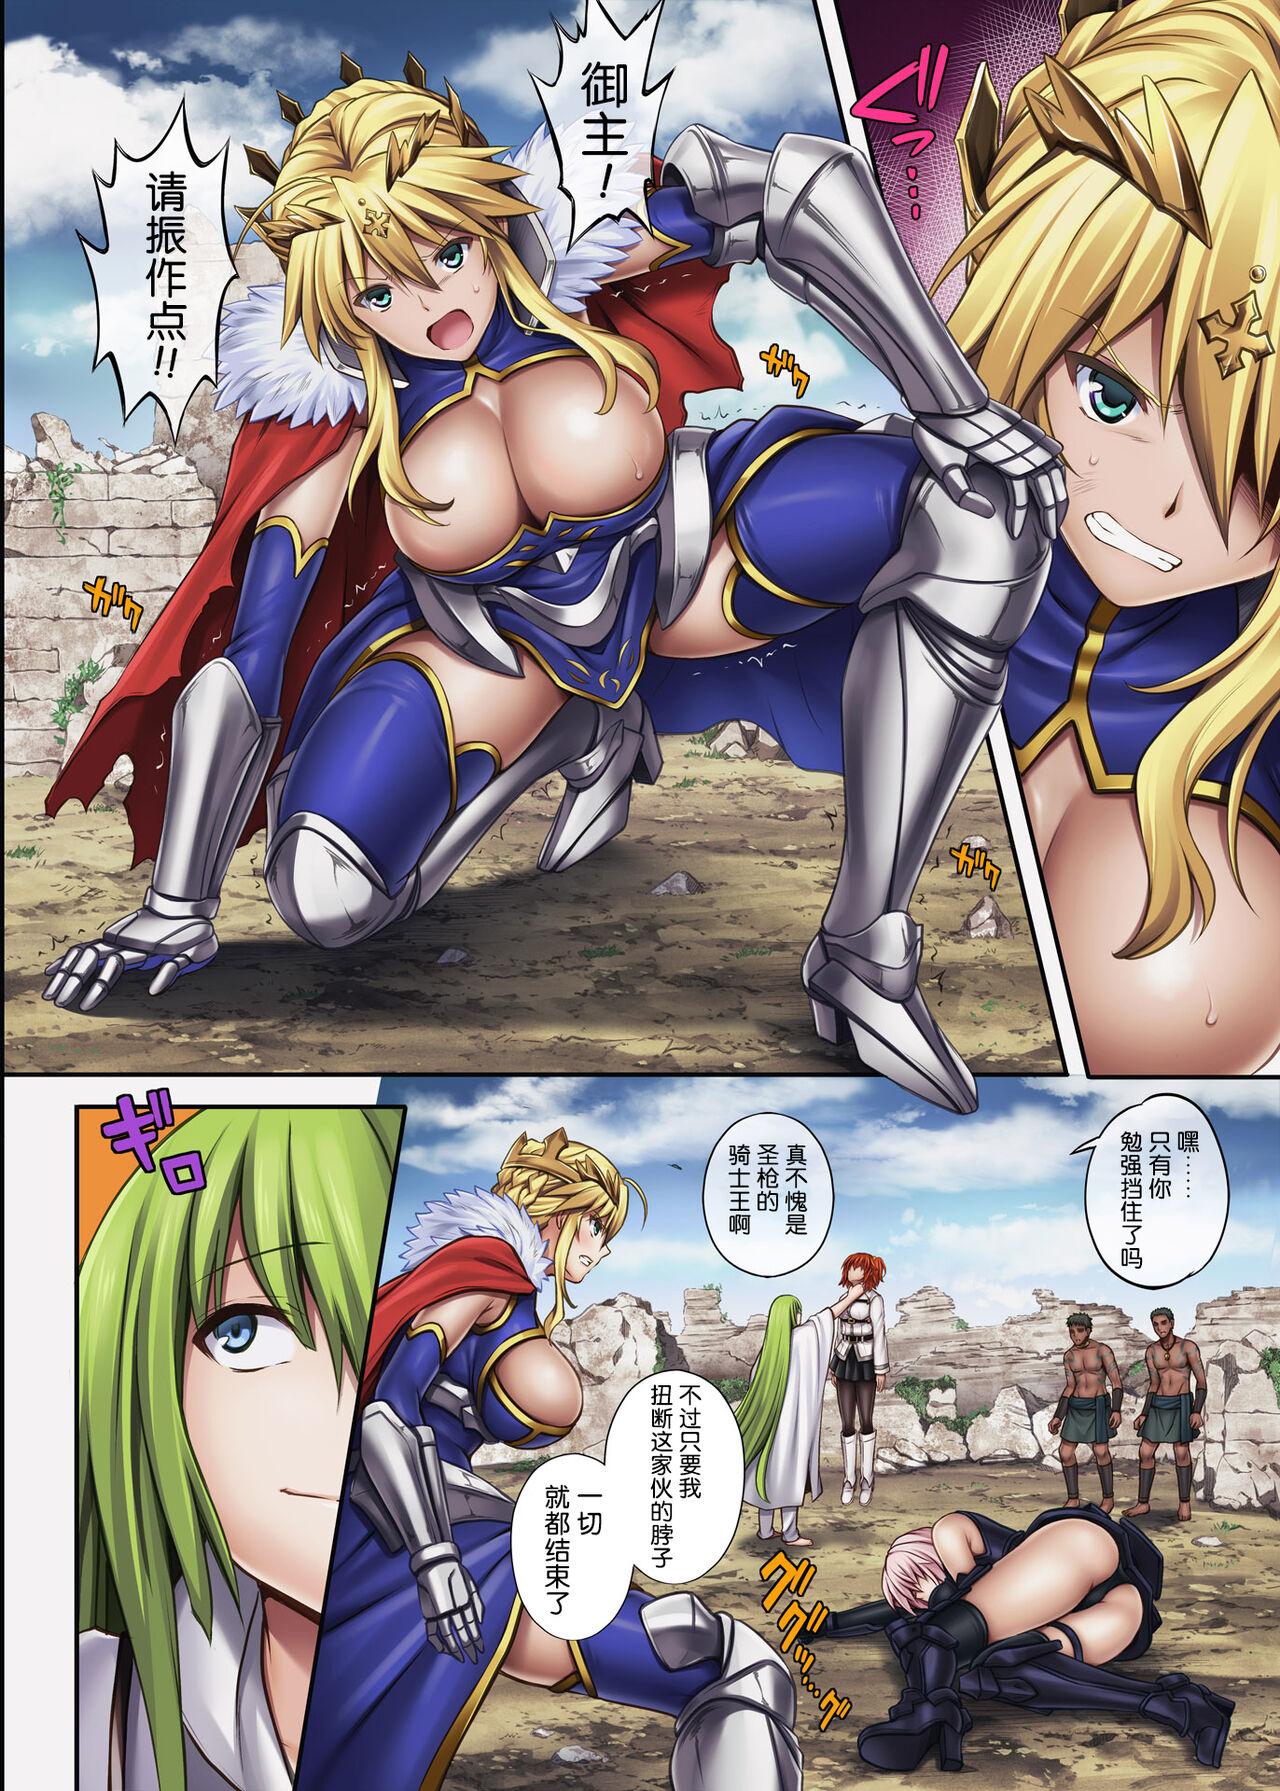 Italian Cyclone no Doujinshi Full Color Pack 4 - Fate grand order Pierced - Page 4